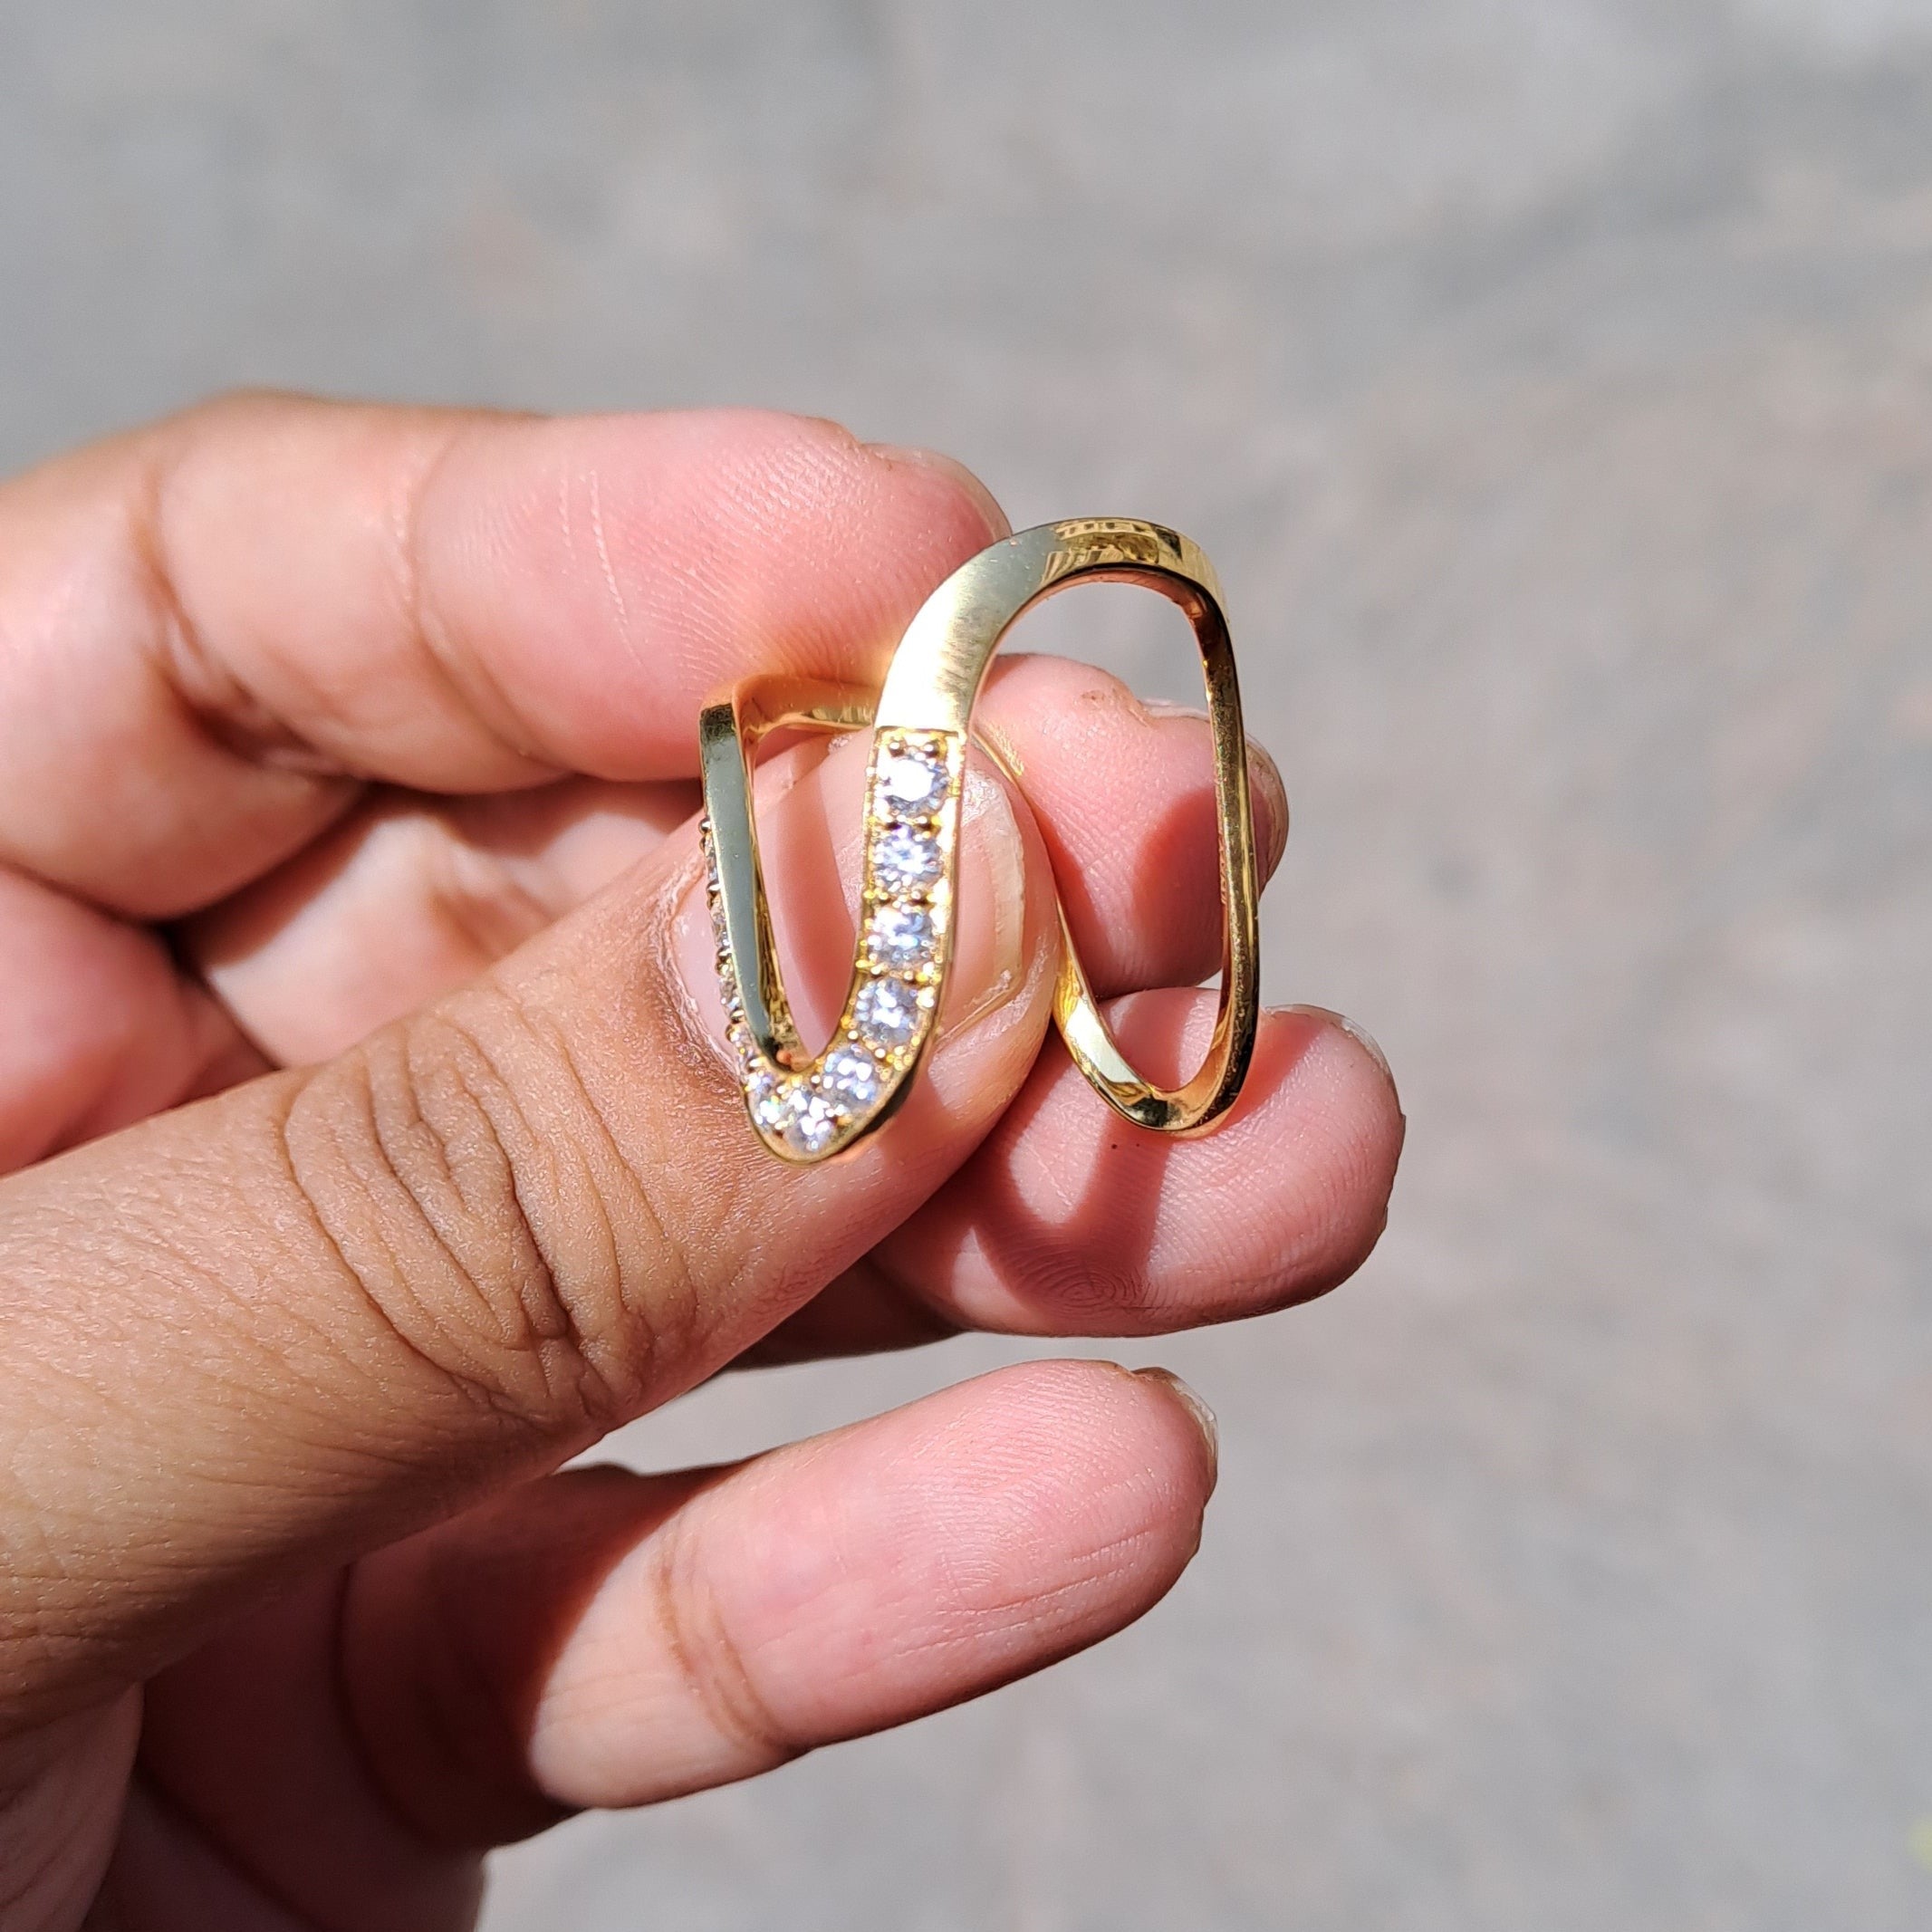 Laxmidas Jewellers - Vadungila - V shaped ring worn by bunt married women  in mangalore, it is also called India Vanki ring. Echoing the rich culture  and traditional values they represent, these